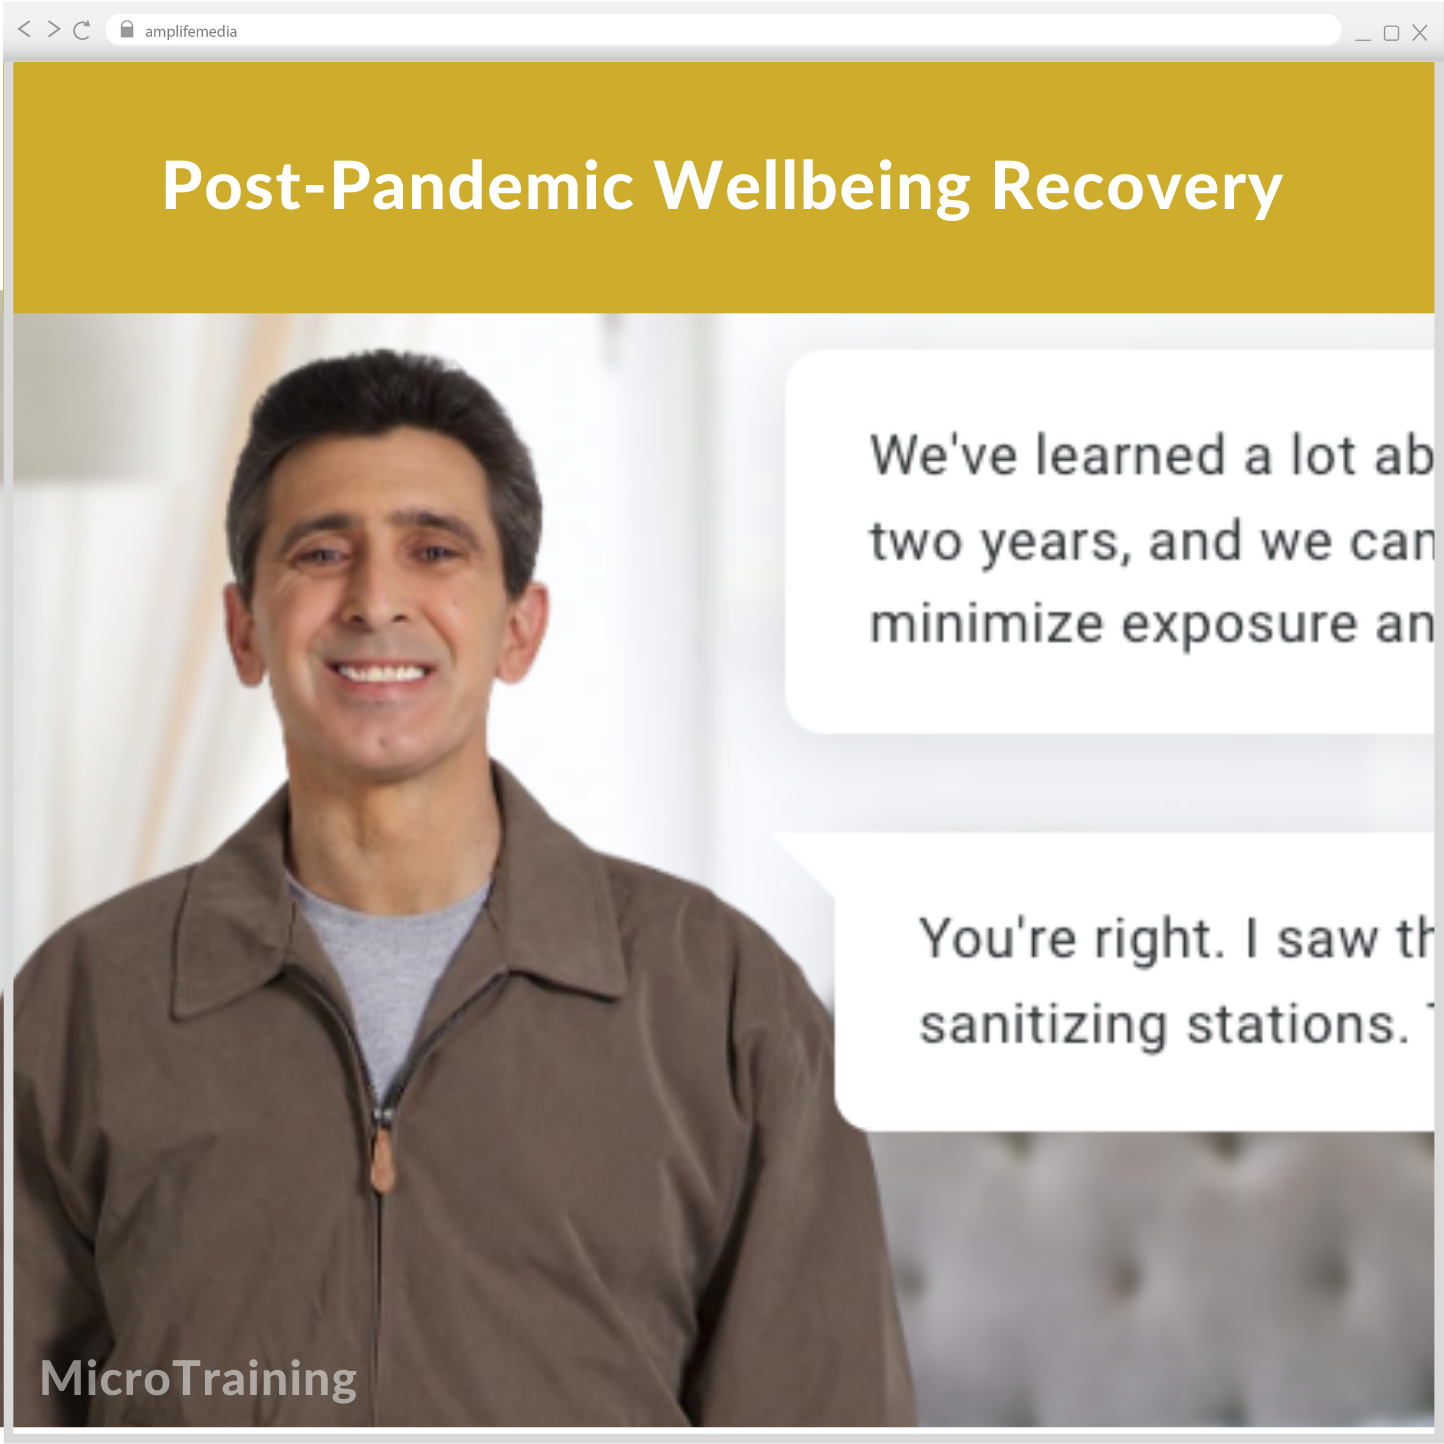 Subscription to Wellbeing Media: Post-Pandemic Wellbeing Recovery MT 422